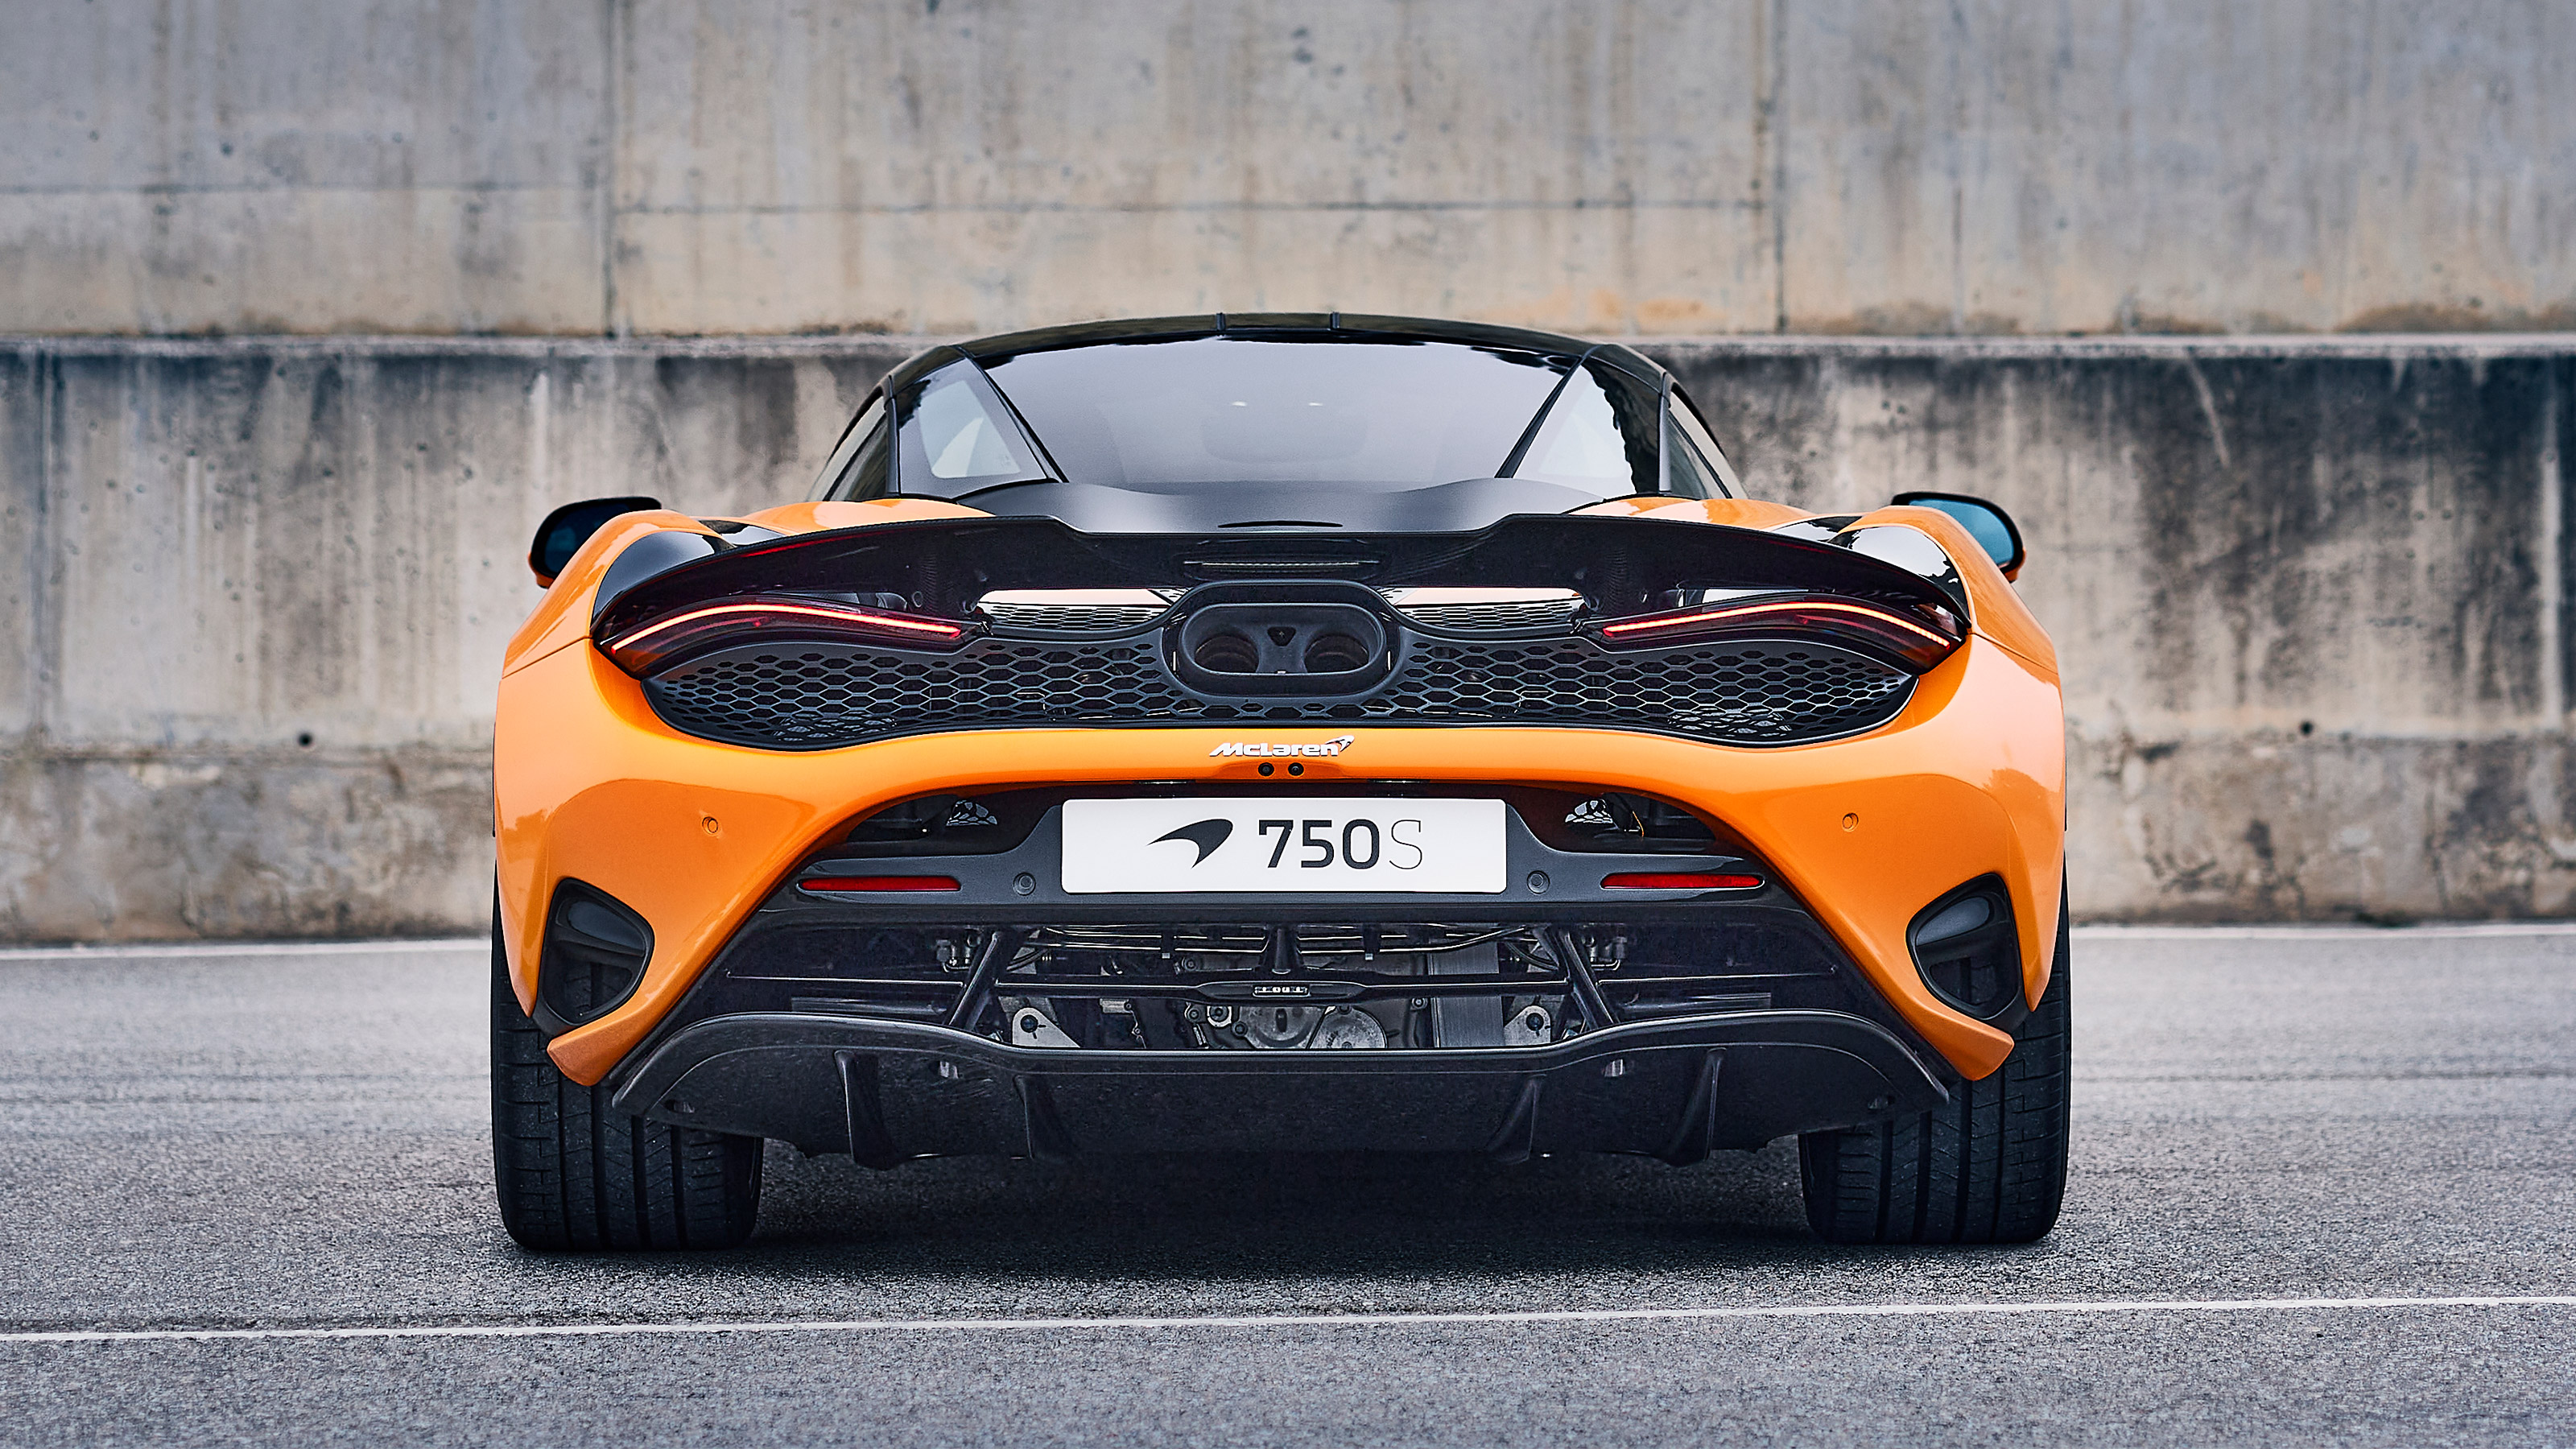 2023 McLaren 750S revealed as new flagship supercar